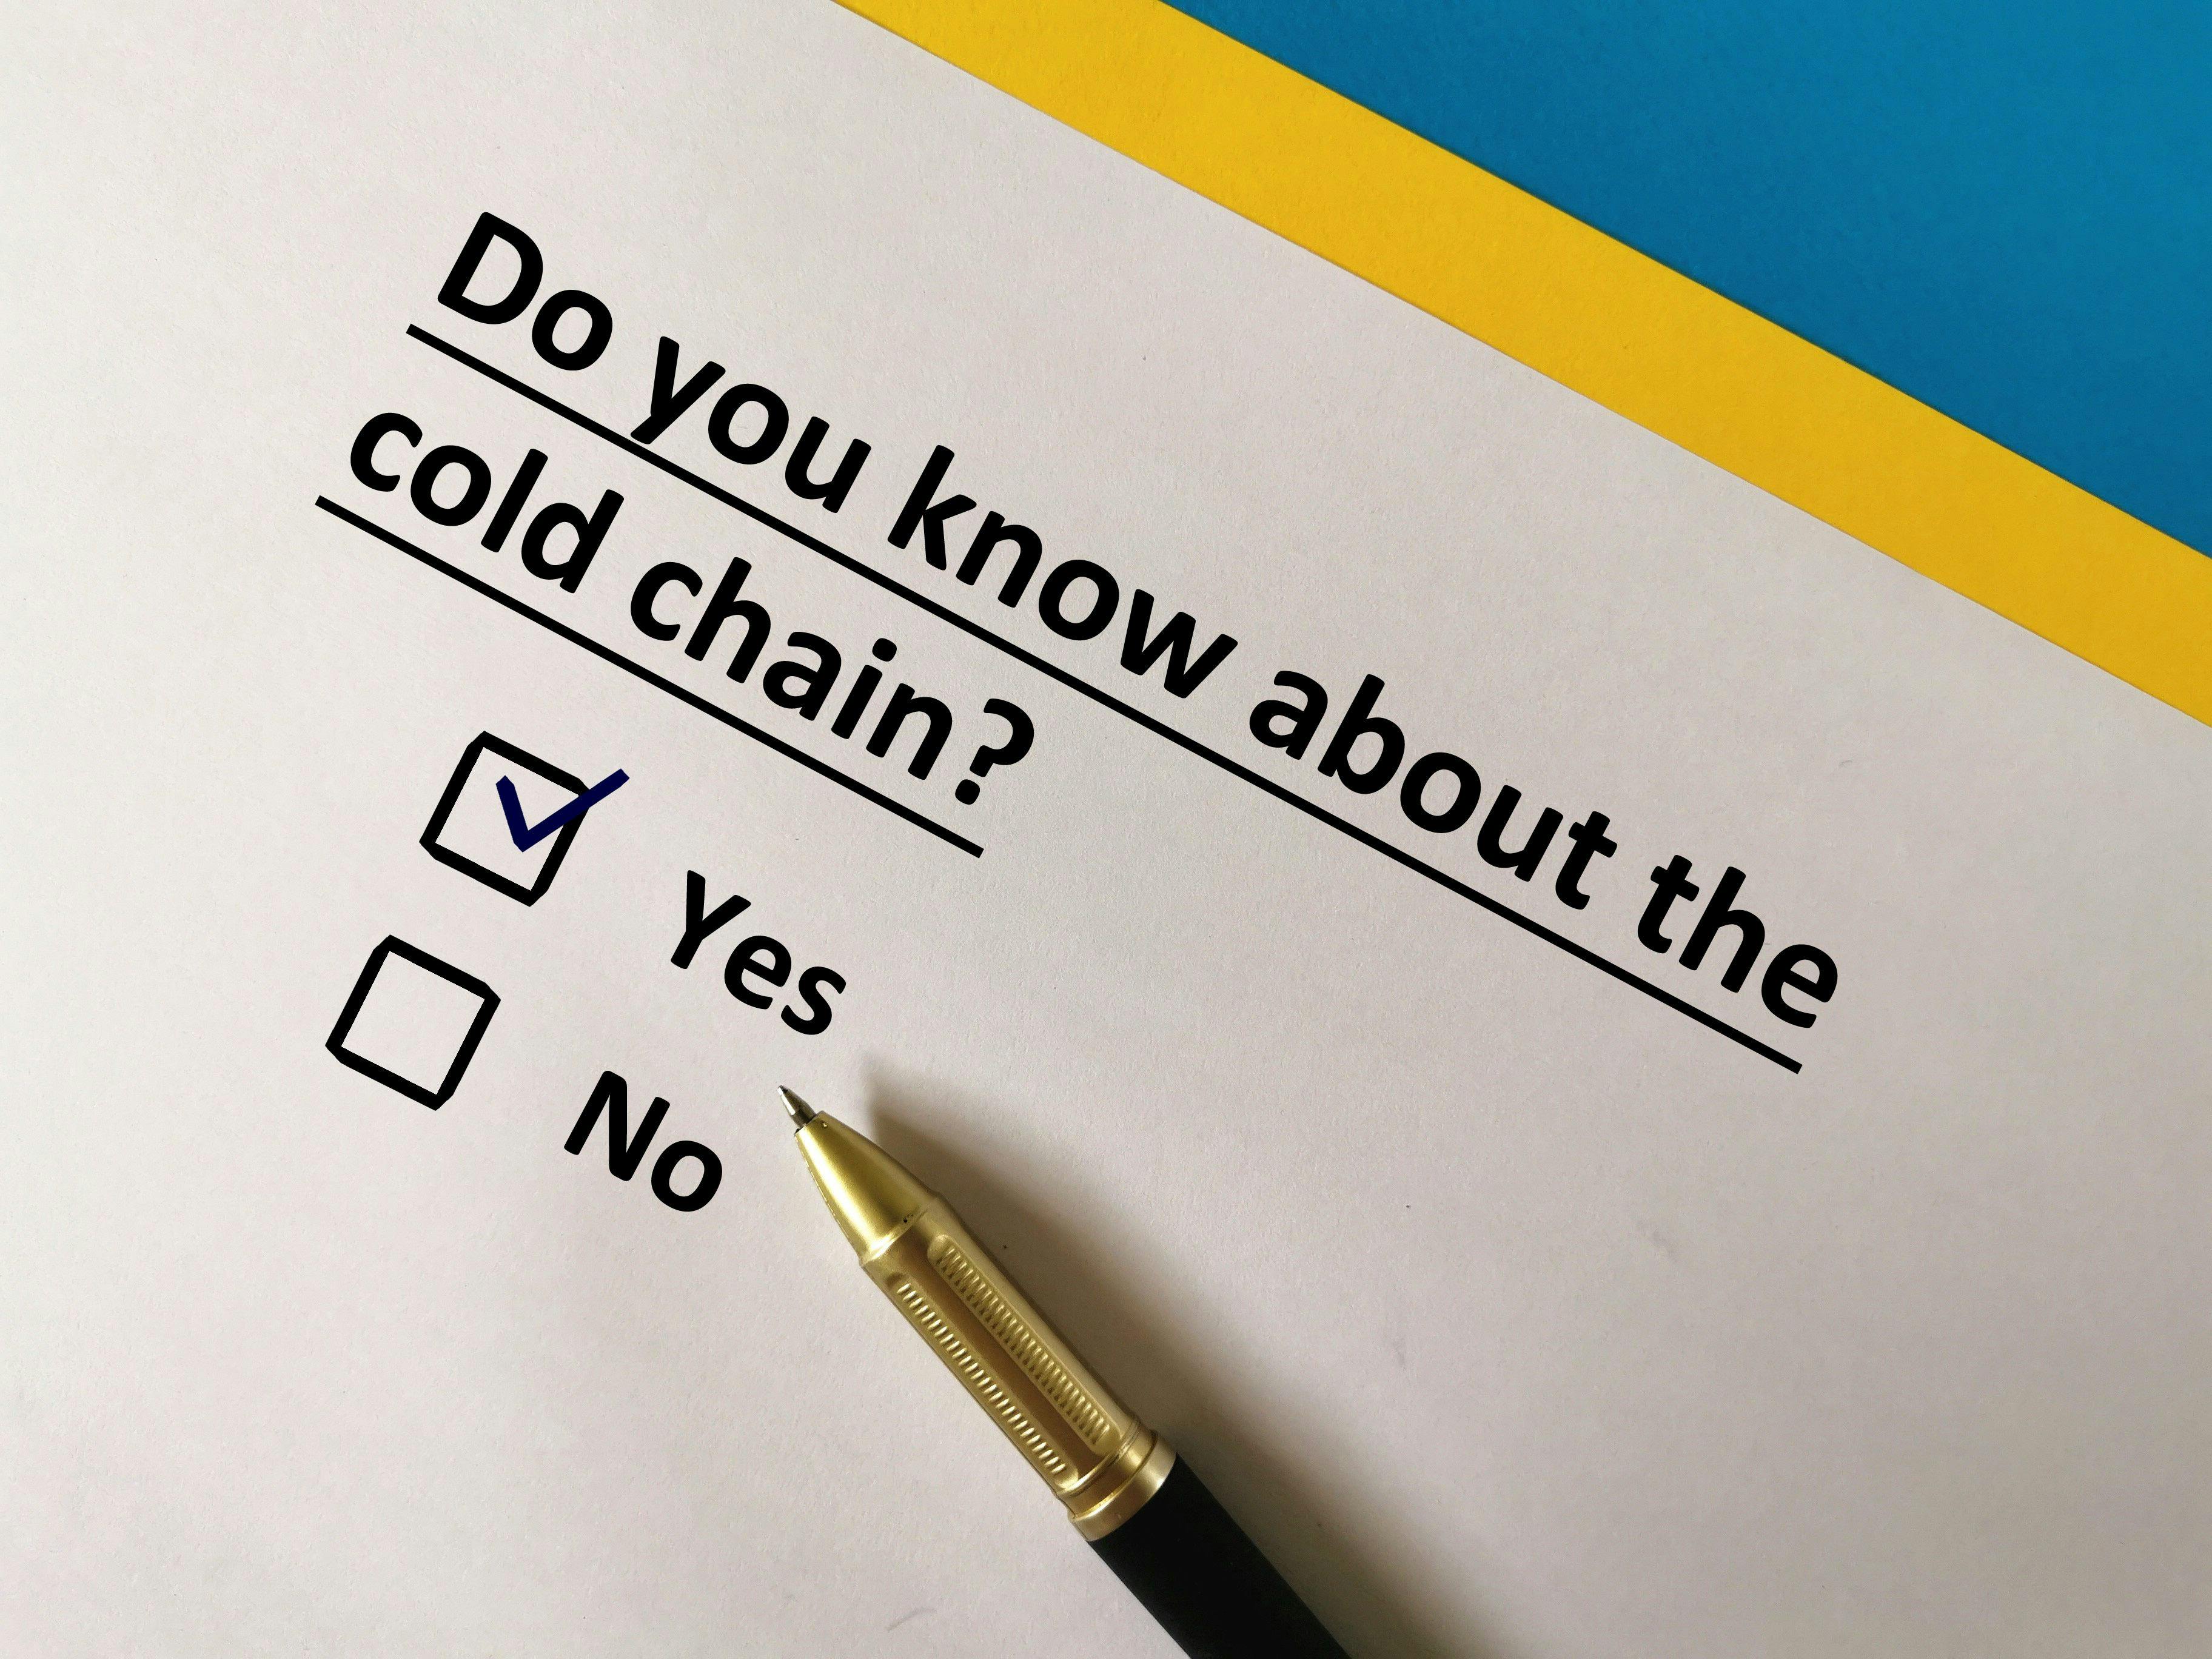 One person is answering question about vaccines. He knows about cold chain. Image Credit: Adobe Stock Images/Richelle